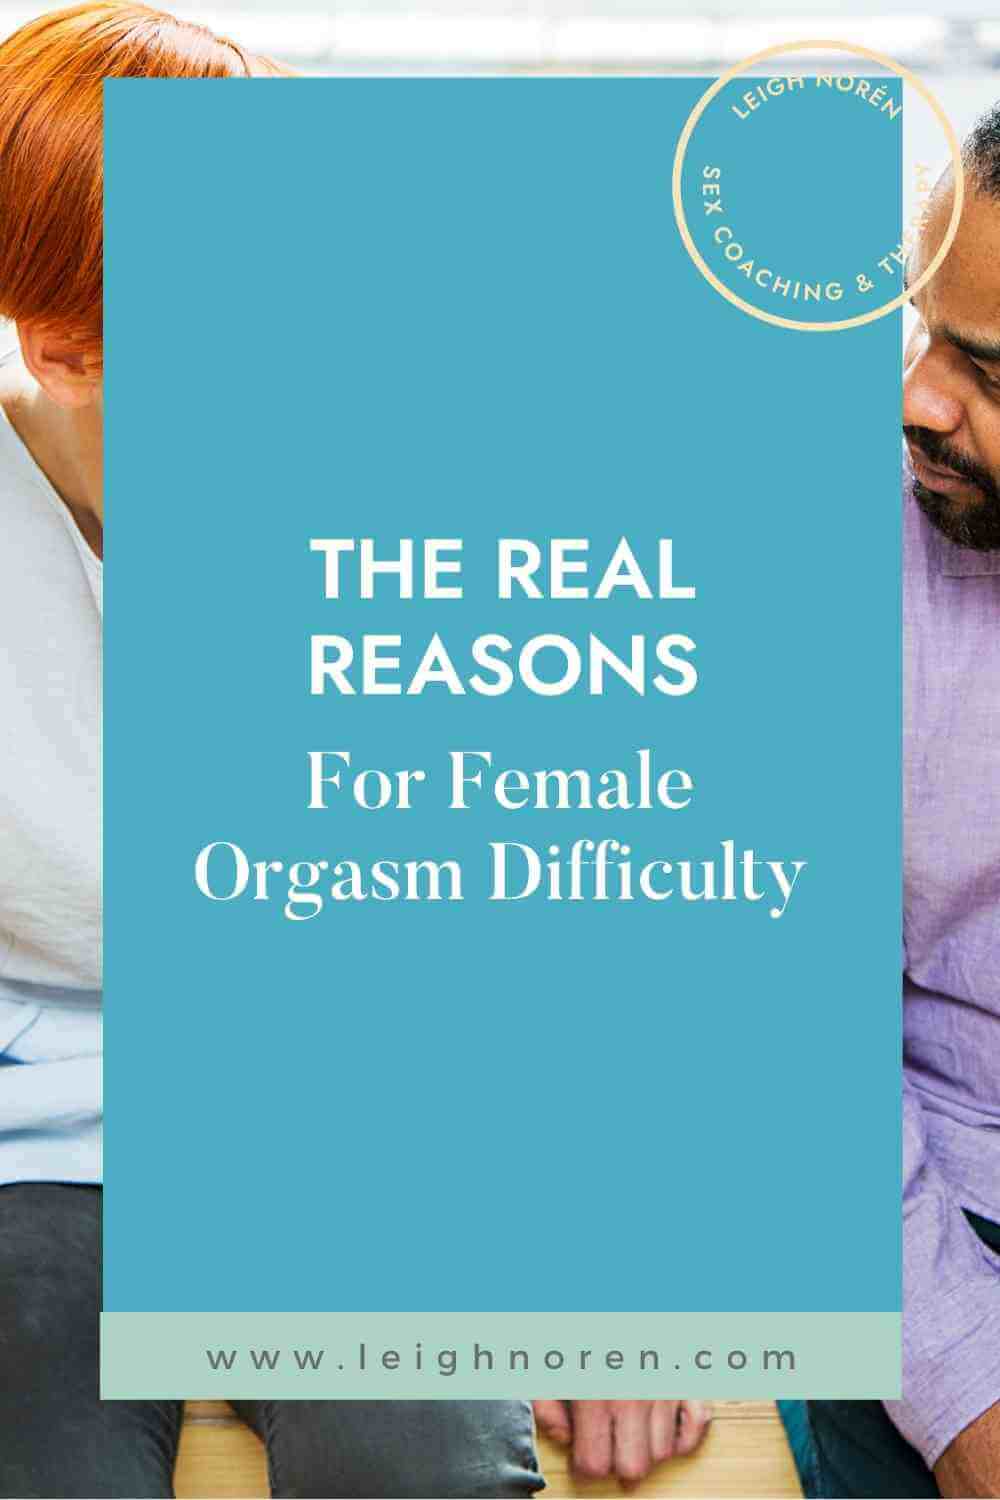 The Real Reasons For Female Orgasm Difficulty